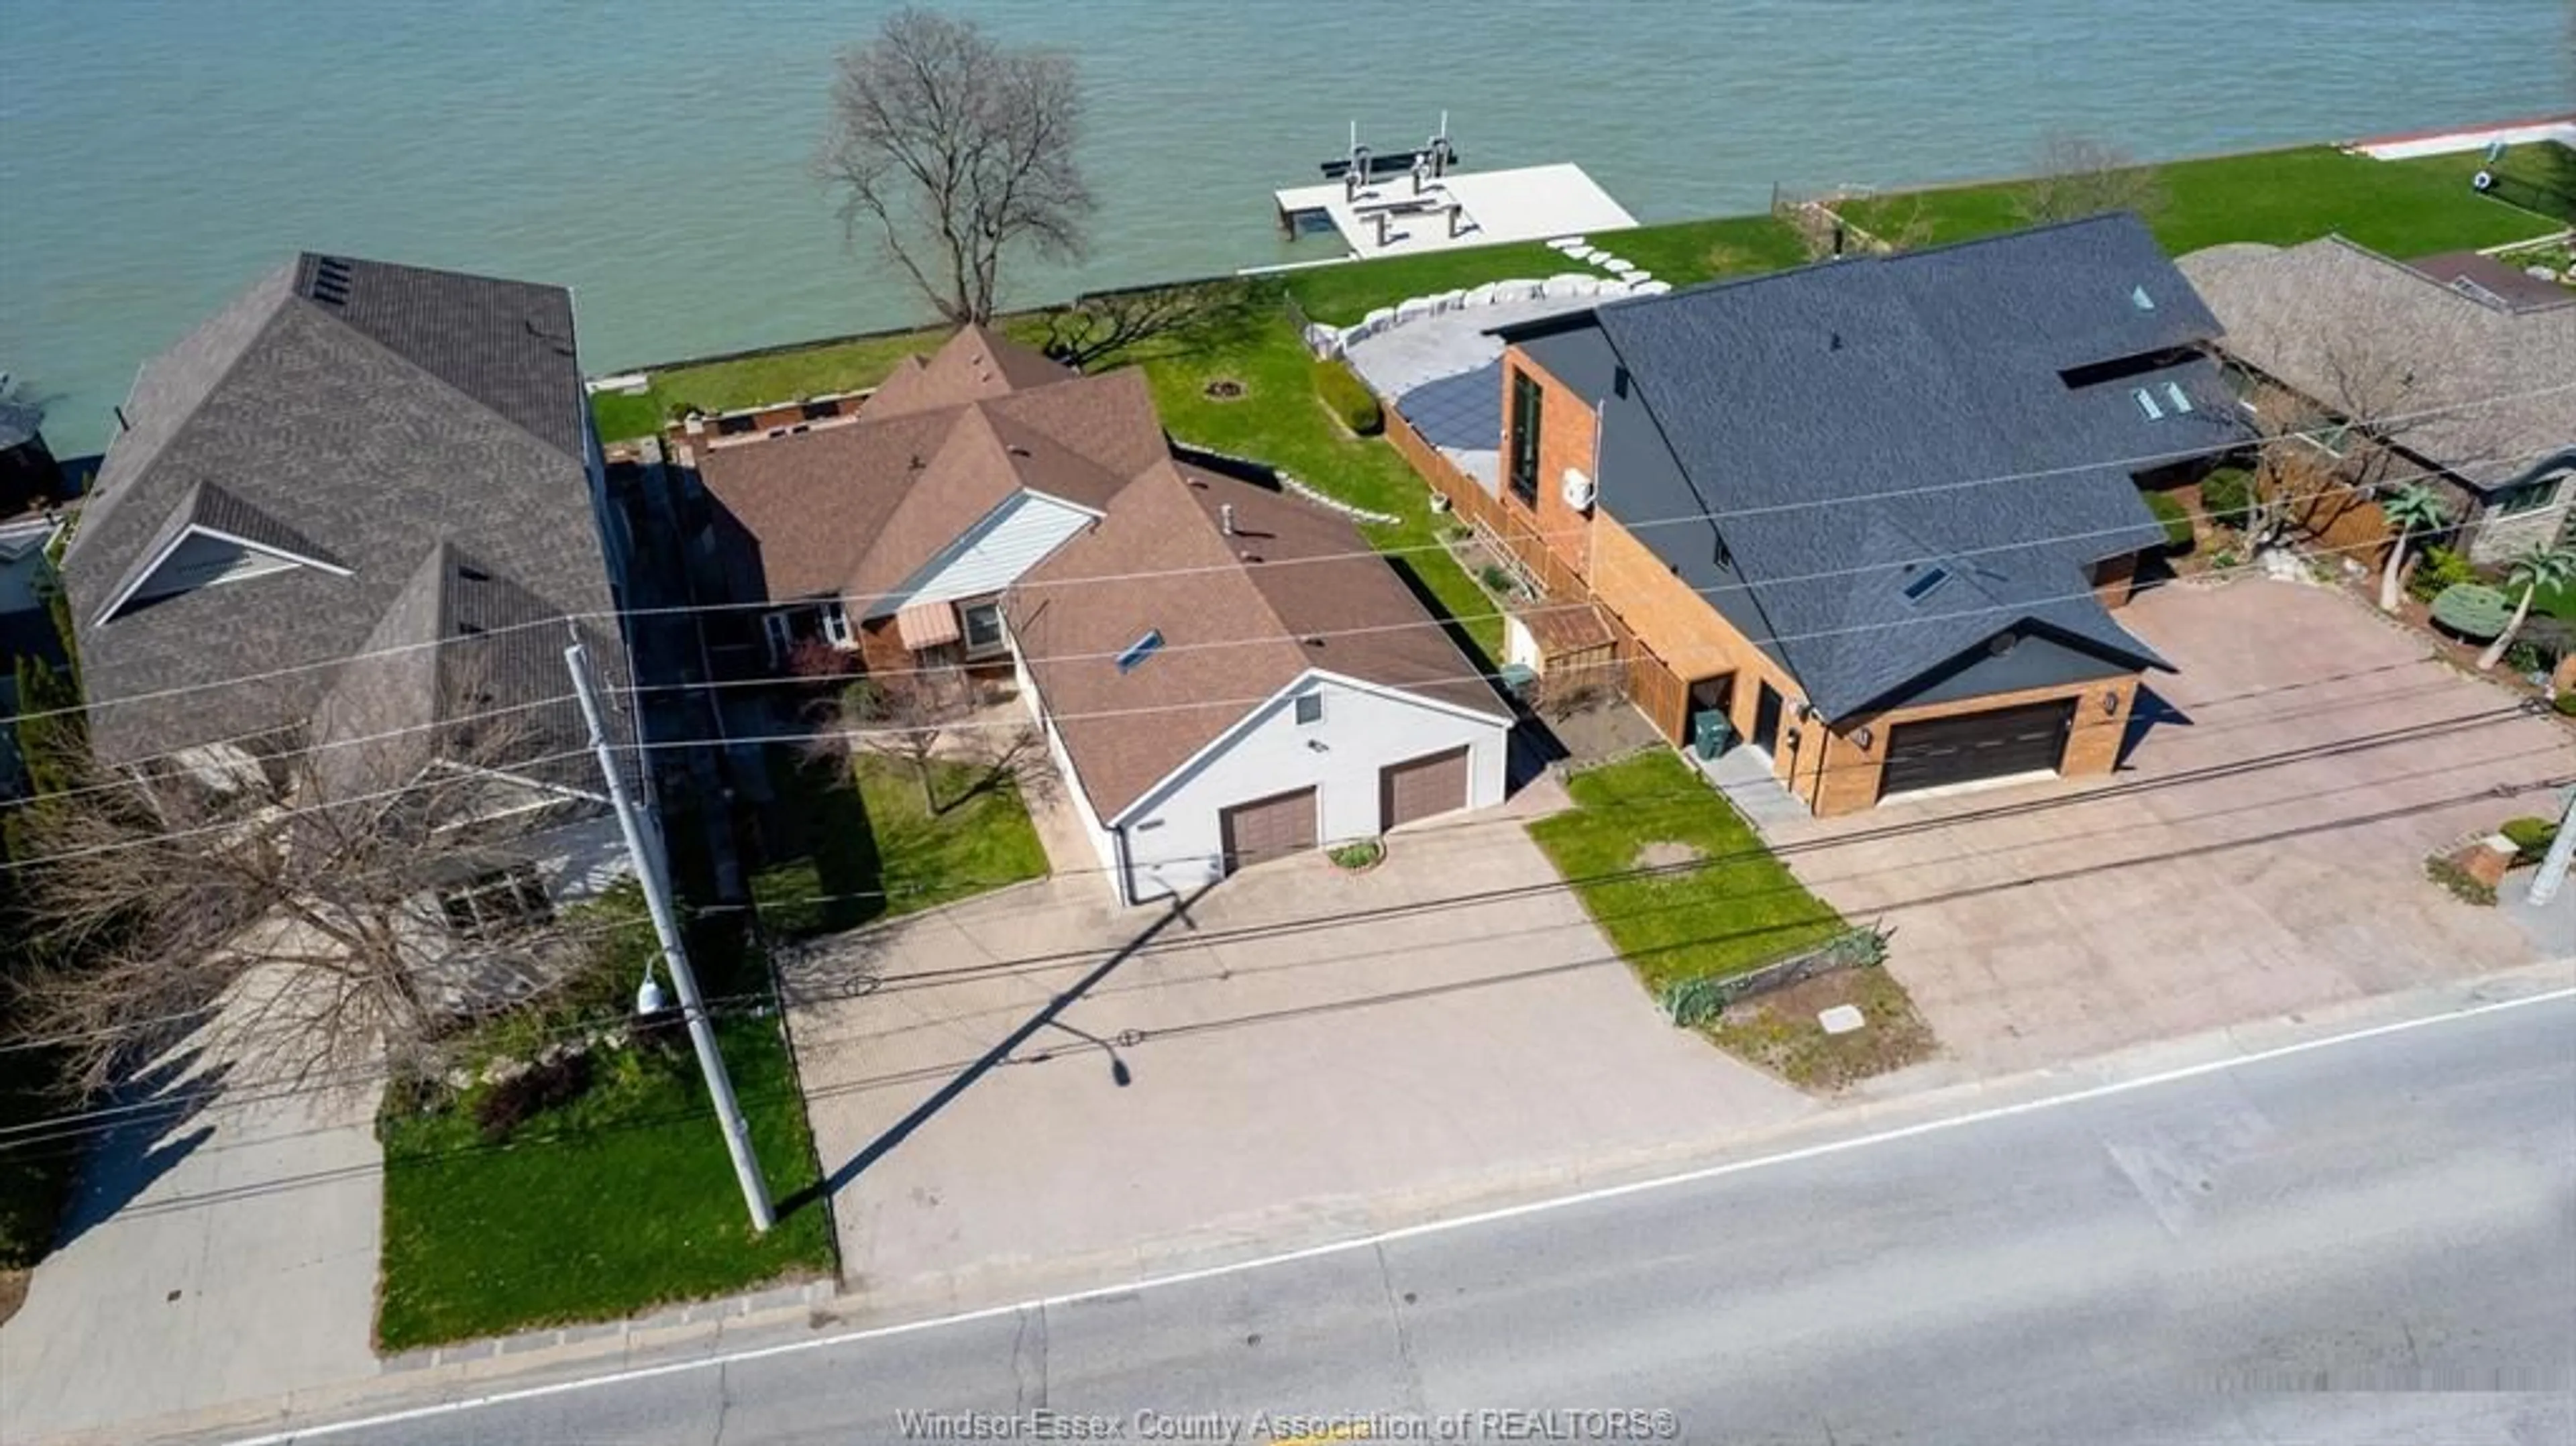 Lakeview for 9828 RIVERSIDE Dr, Windsor Ontario N8P 1A1